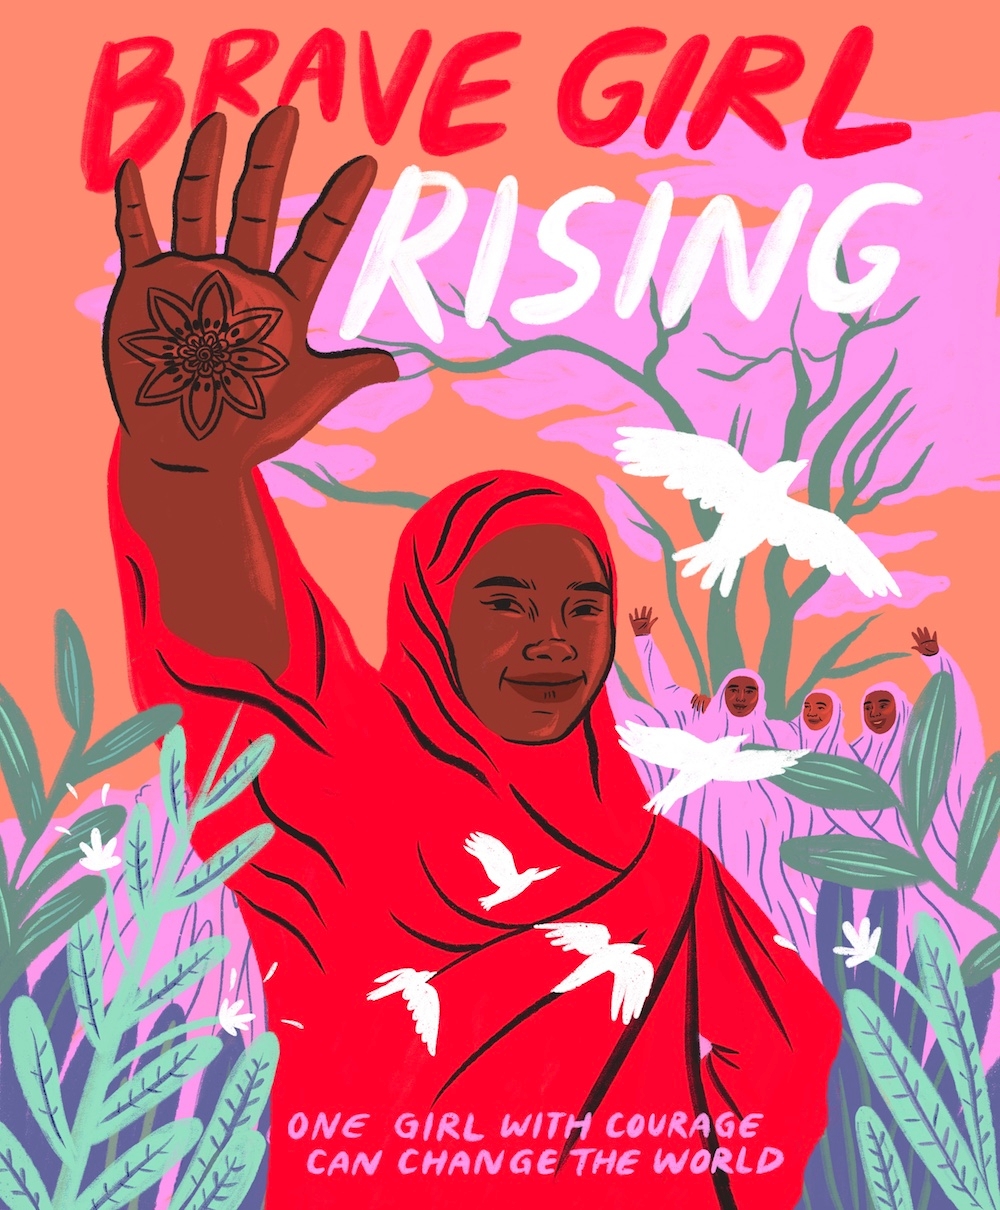 Bright illustrated poster with a woman among plants in red hijab and the words above reading "Brave Girl Rising" and a white bird flying